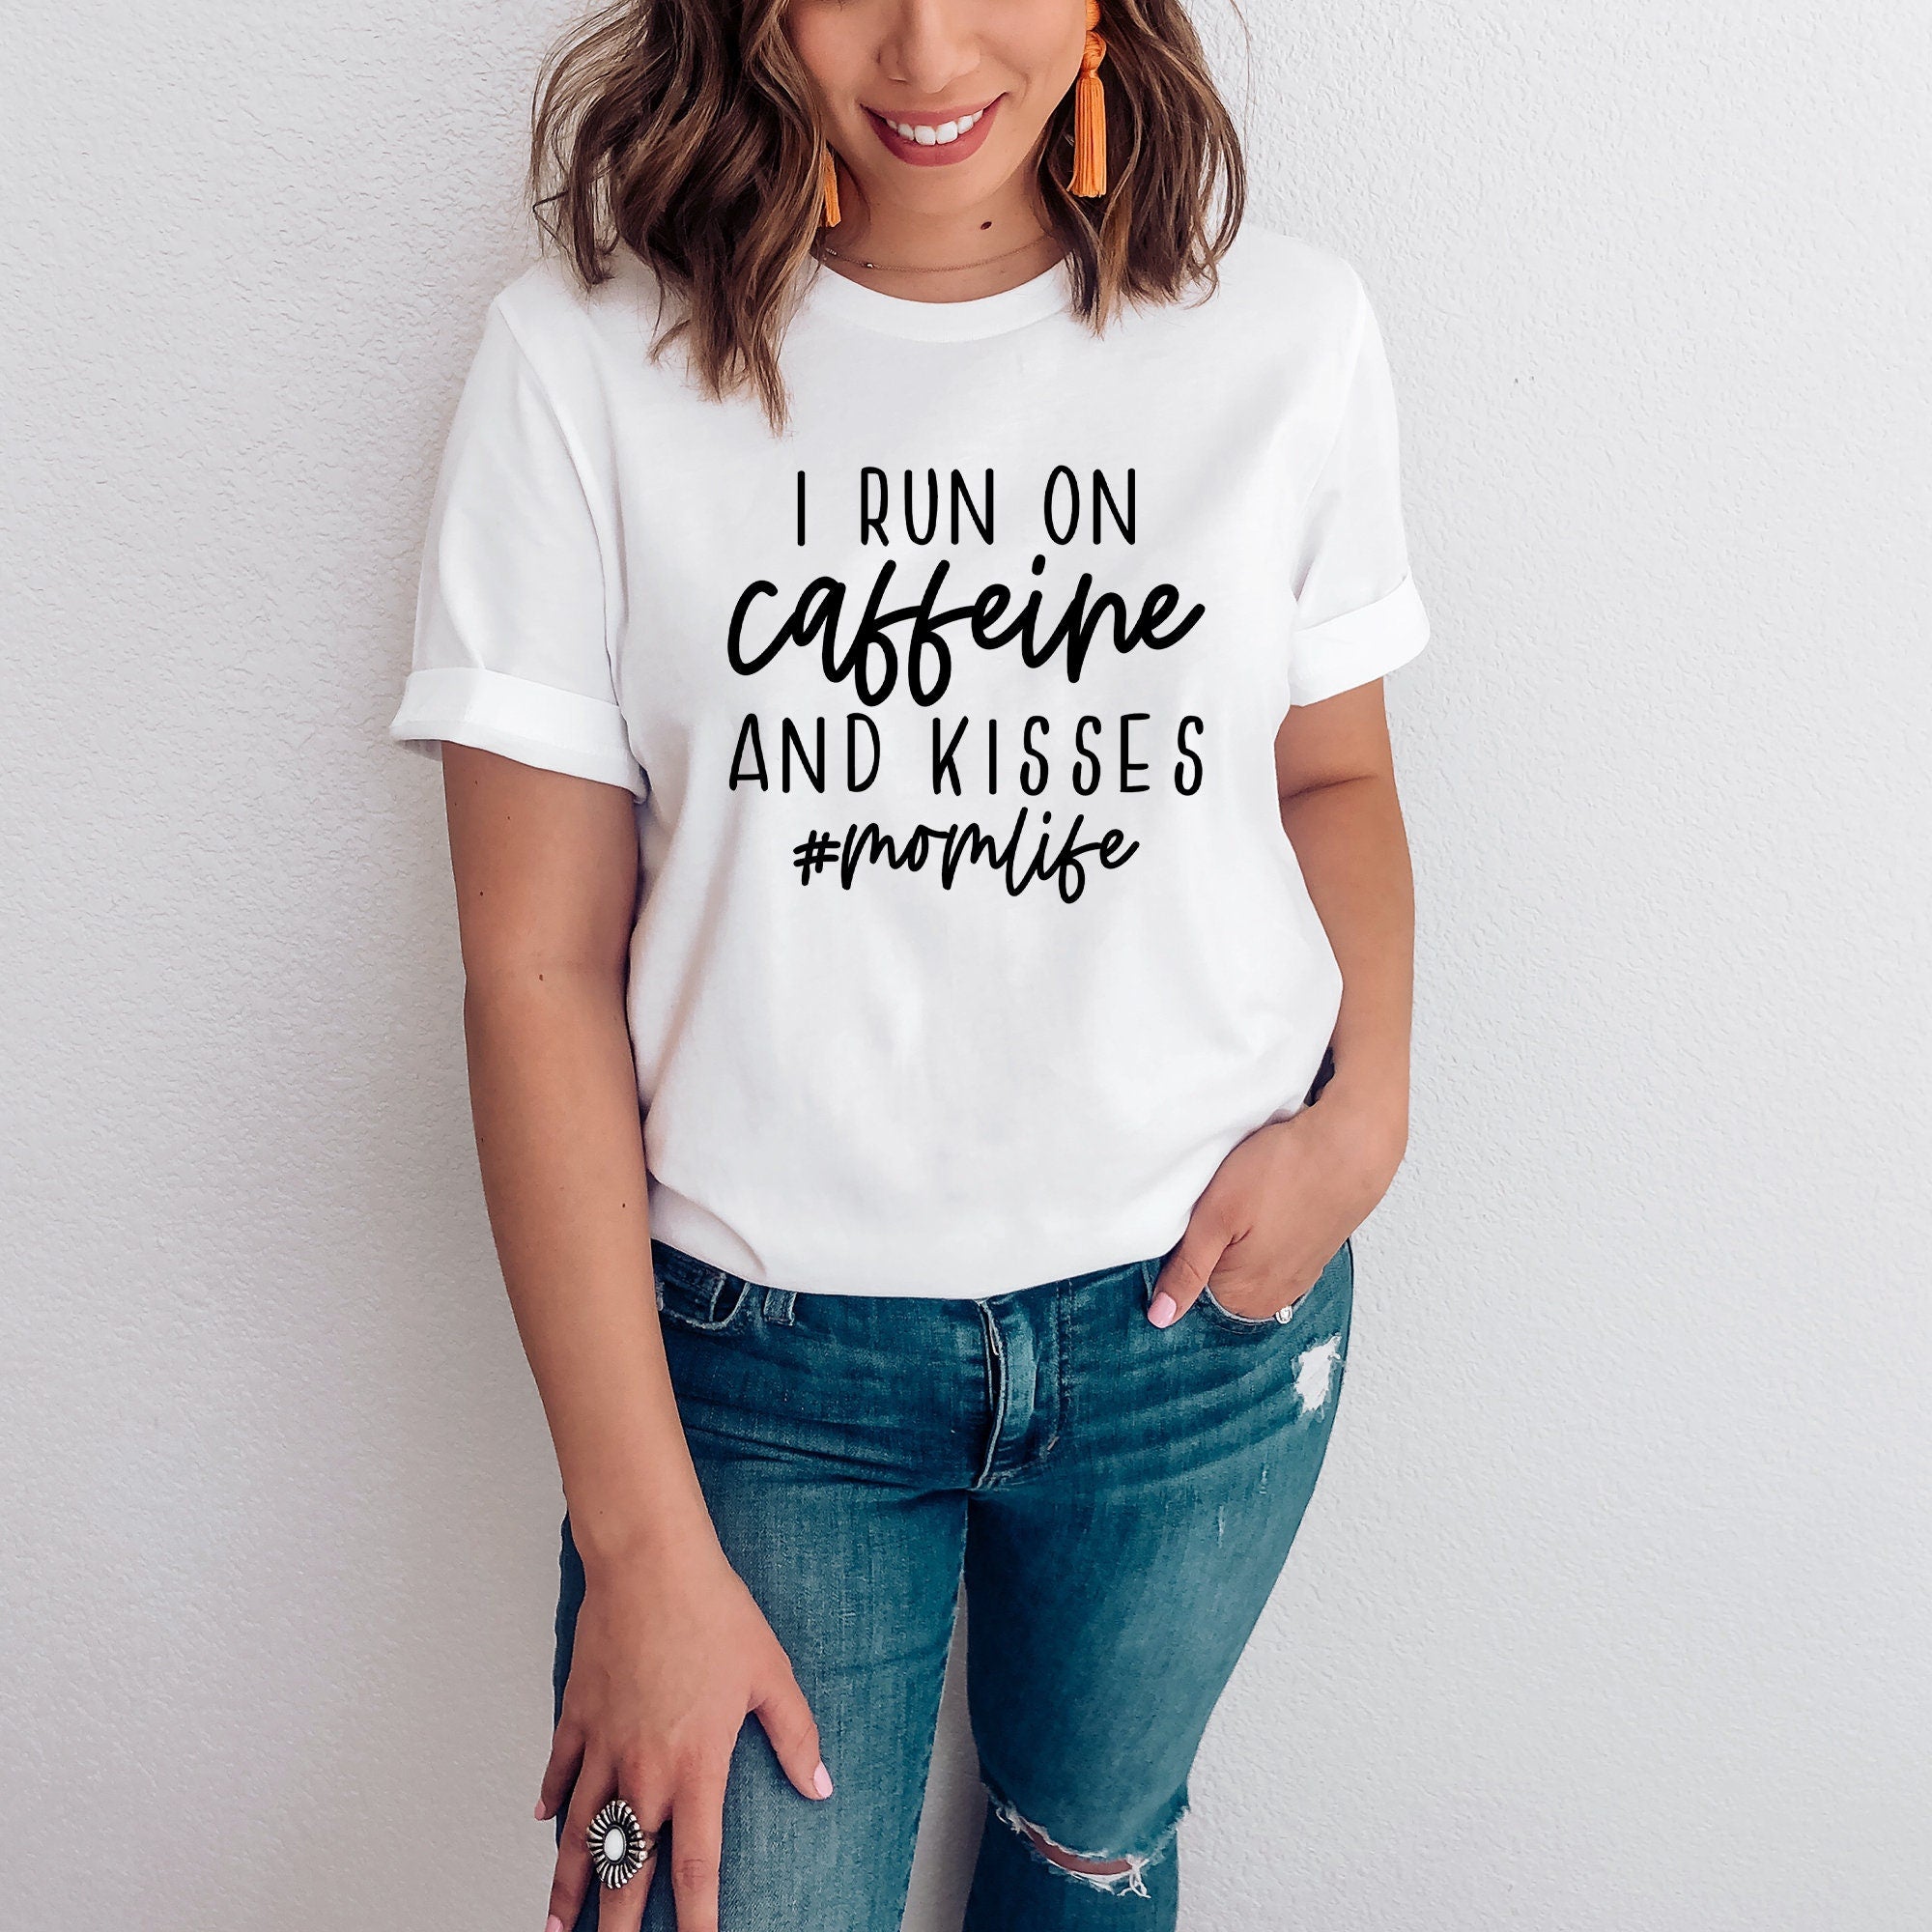 Mother's Day, Gift for Her, Mom Shirts, Mom-life Shirt, Shirts for Moms, Trendy Mom T-Shirts, Cool Mom Shirts, Shirts for Moms